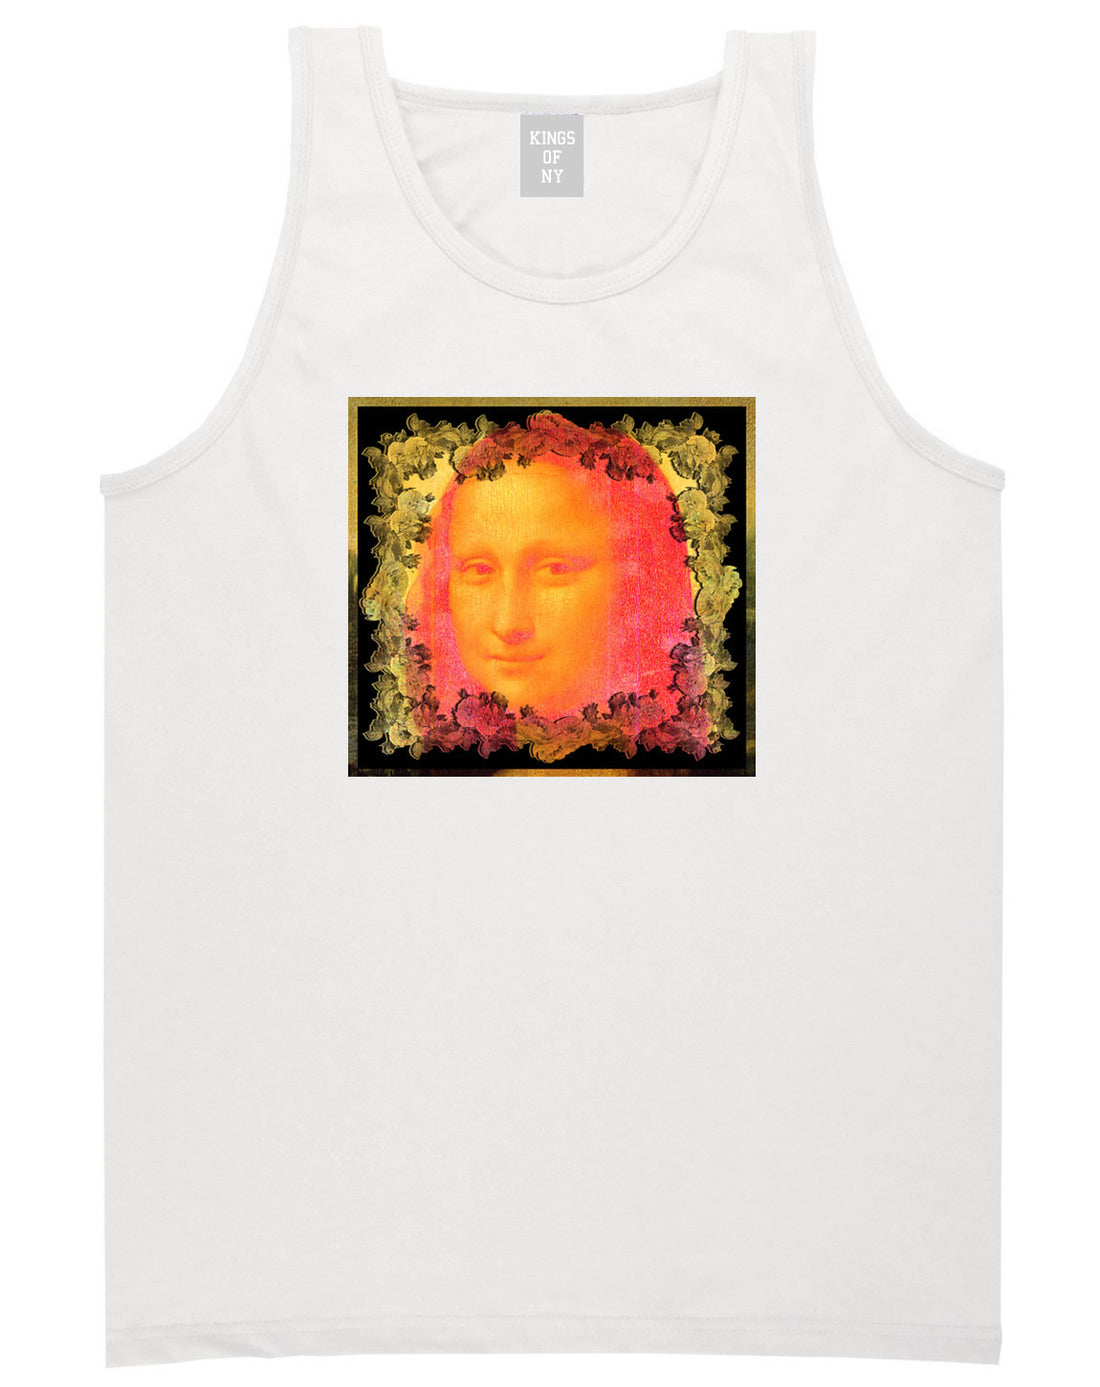 Mona Artwork Art Lisa Wall Painting Tank Top In White by Kings Of NY